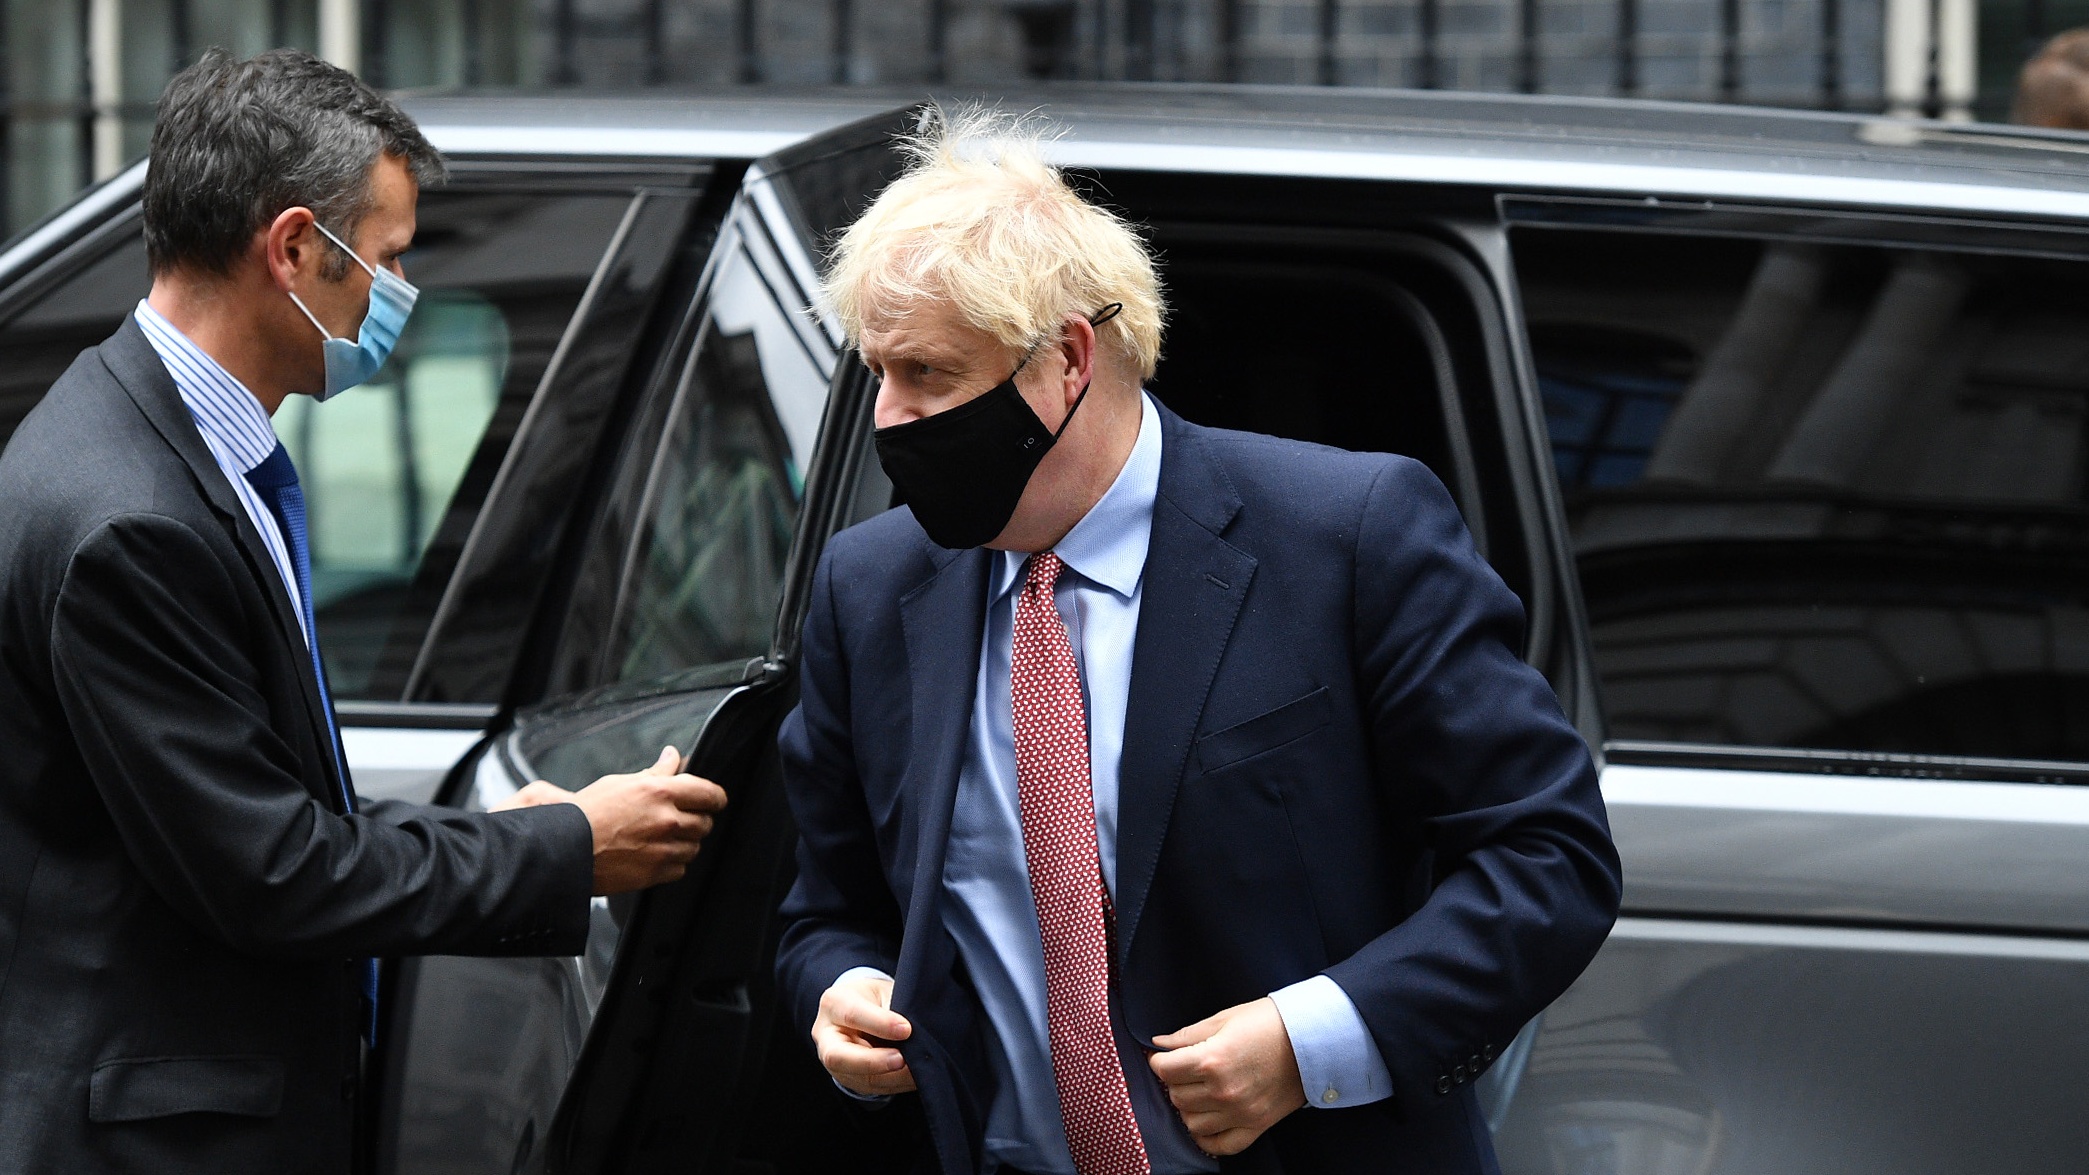 Boris Johnson leaves Downing Street to deliver his address to the virtual Conservative Party conference.